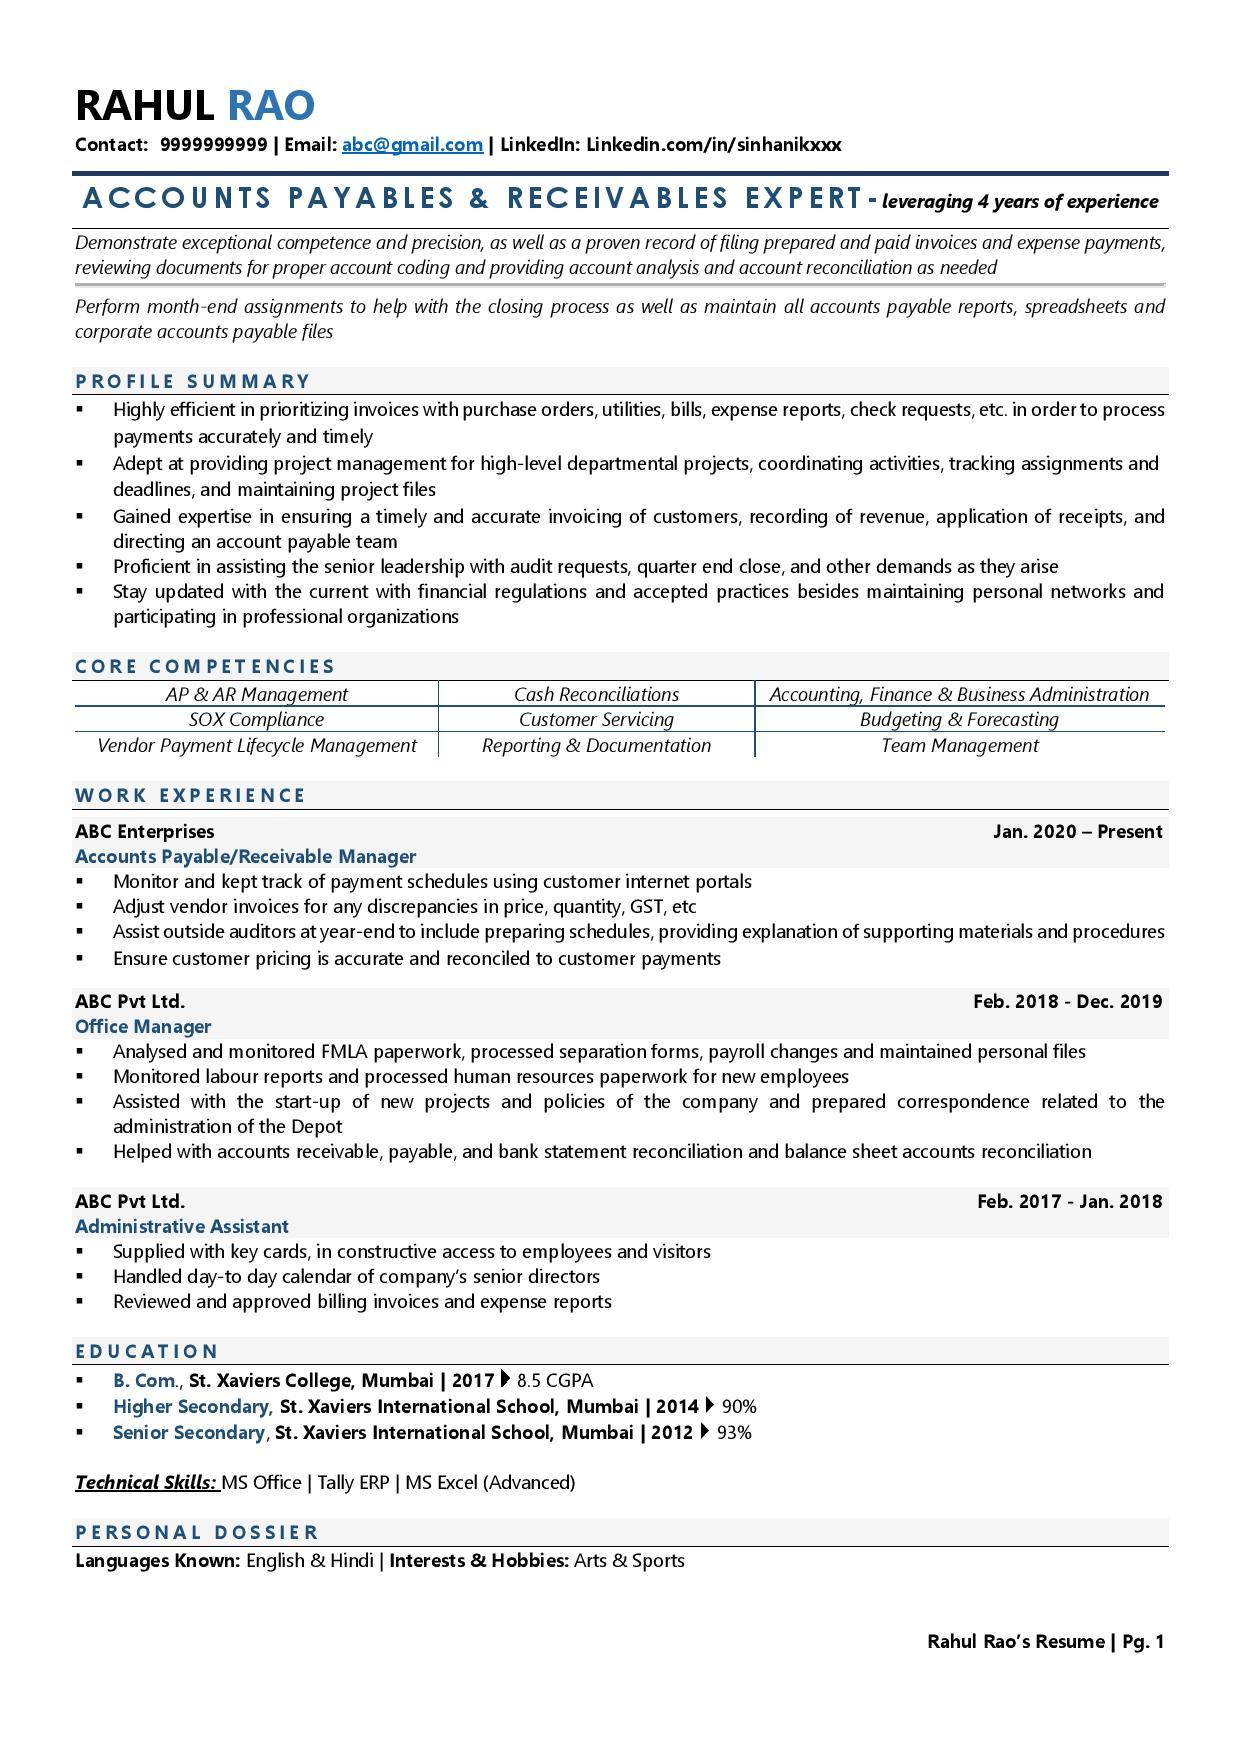 Accounts Payable & Receivable Resume Examples & Template (with job